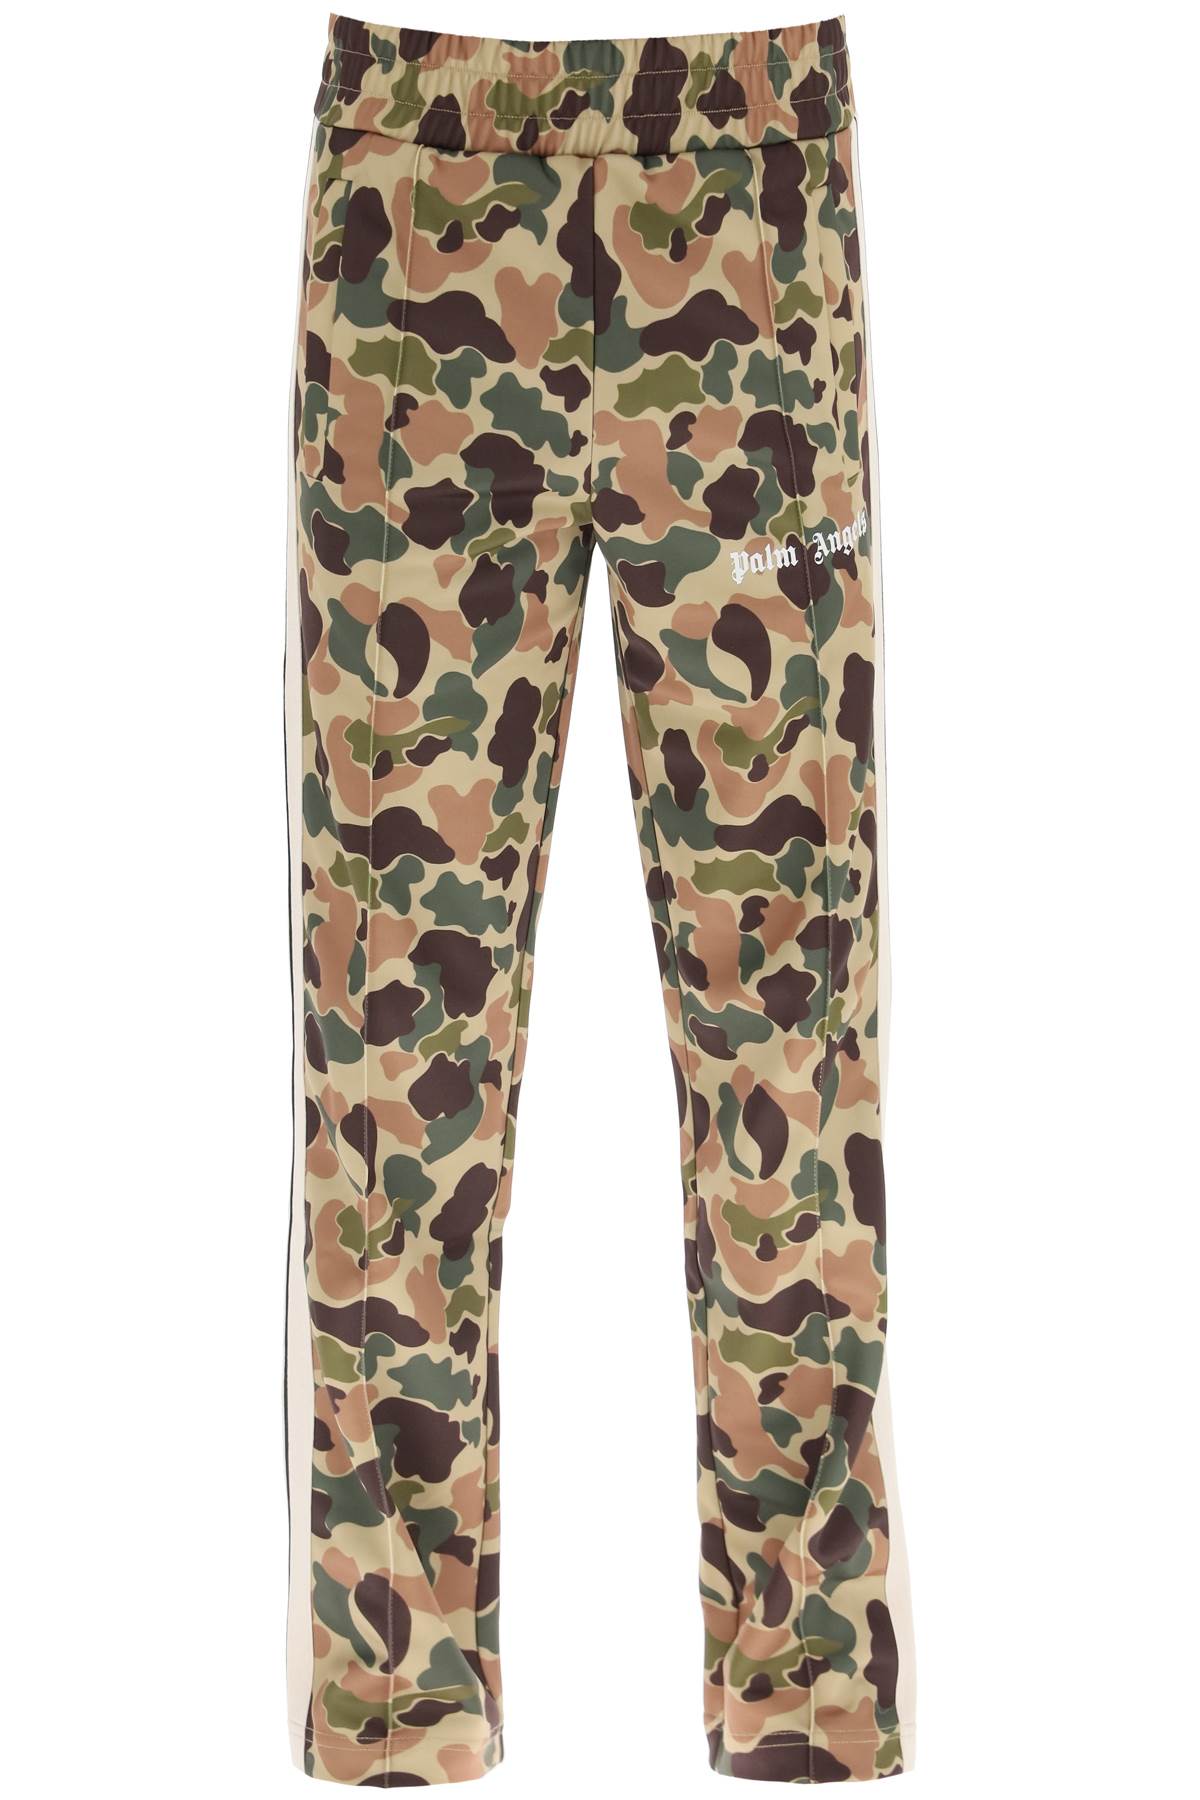 Palm Angels Camouflage Trackpants